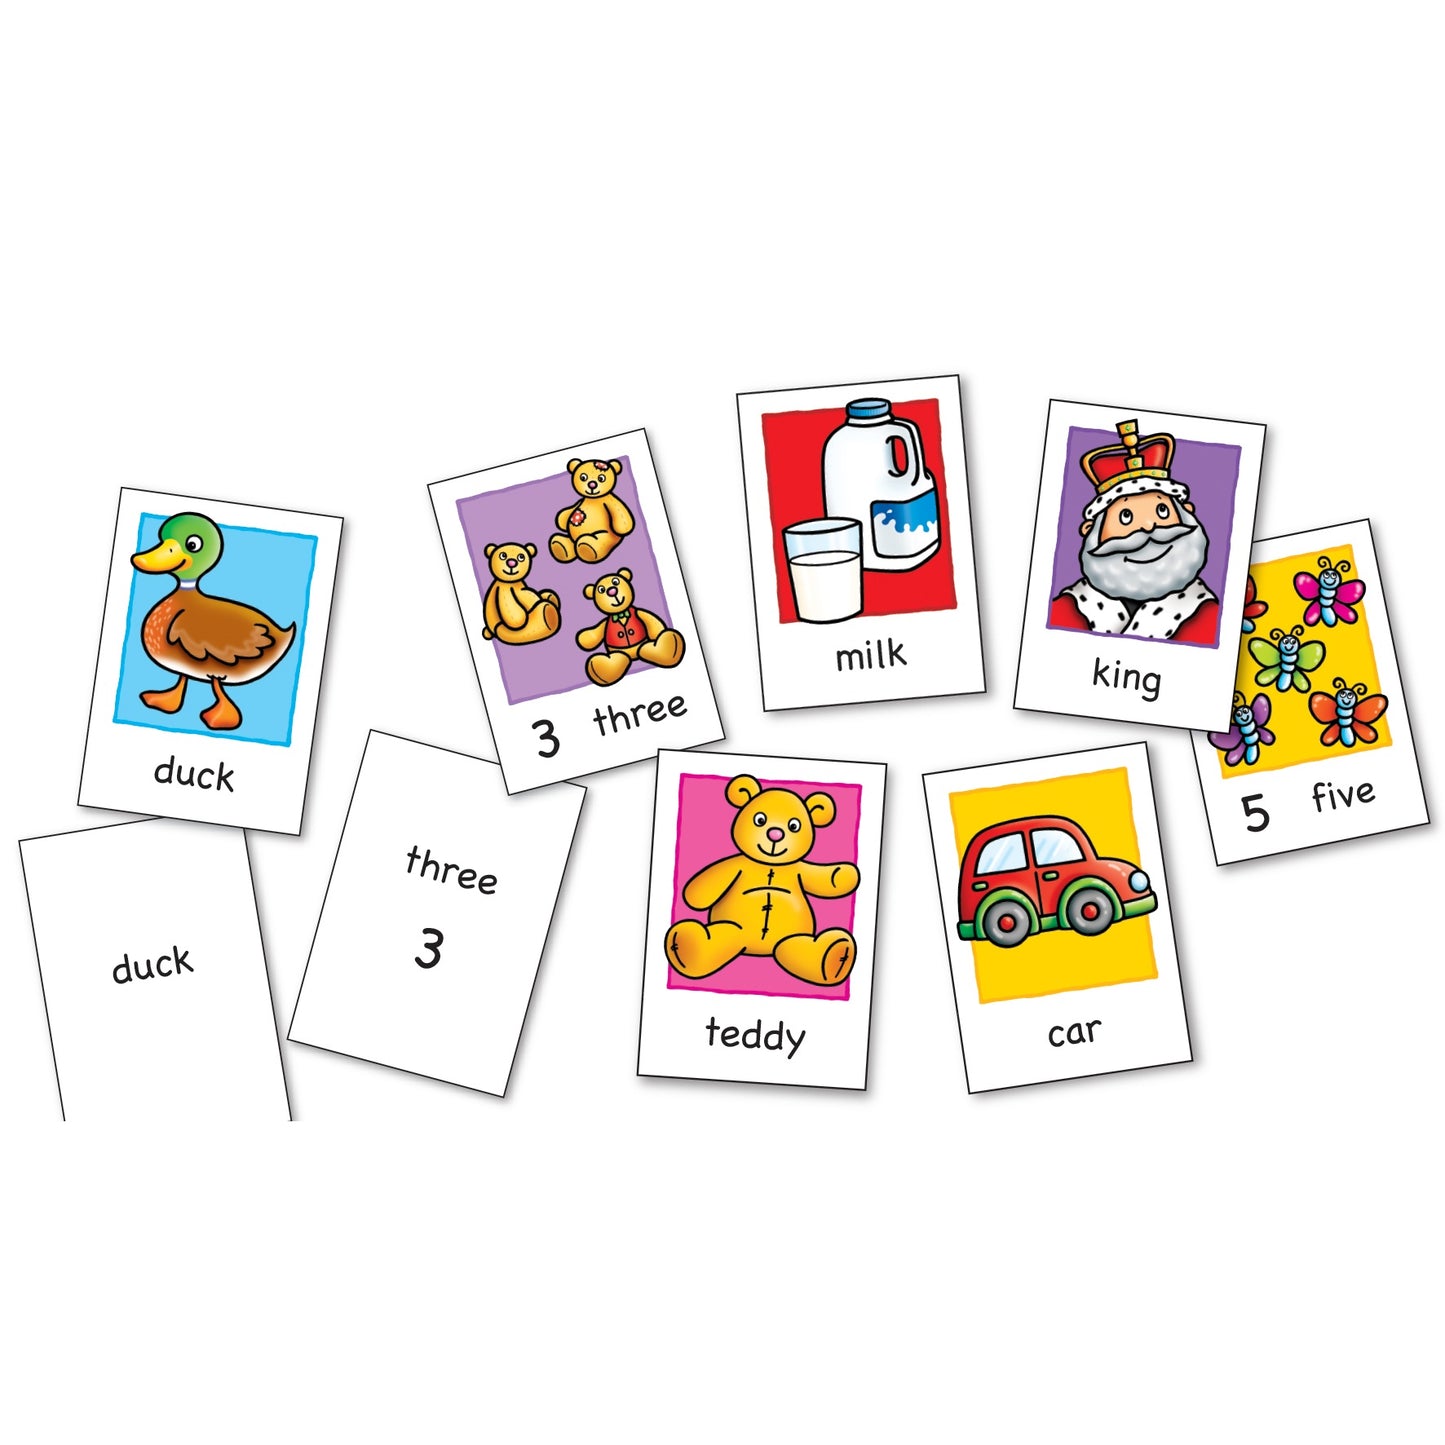 Orchard Toys Flashcards 50 Cards 圖像認字卡 50 張